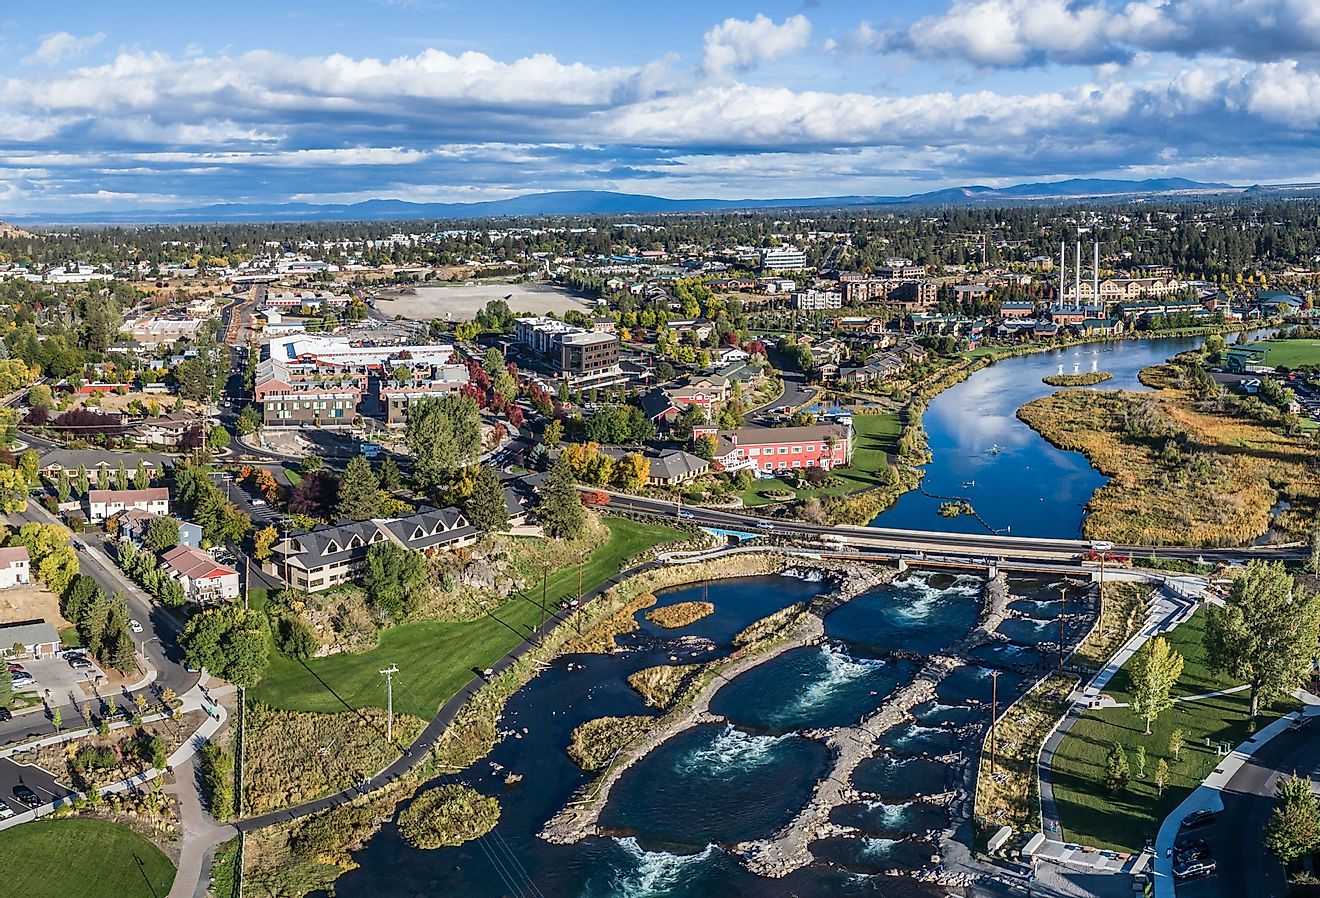 An aerial view of the Bend, Oregon Whitewater Park. Image credit Mike Albright Photography via Shutterstock